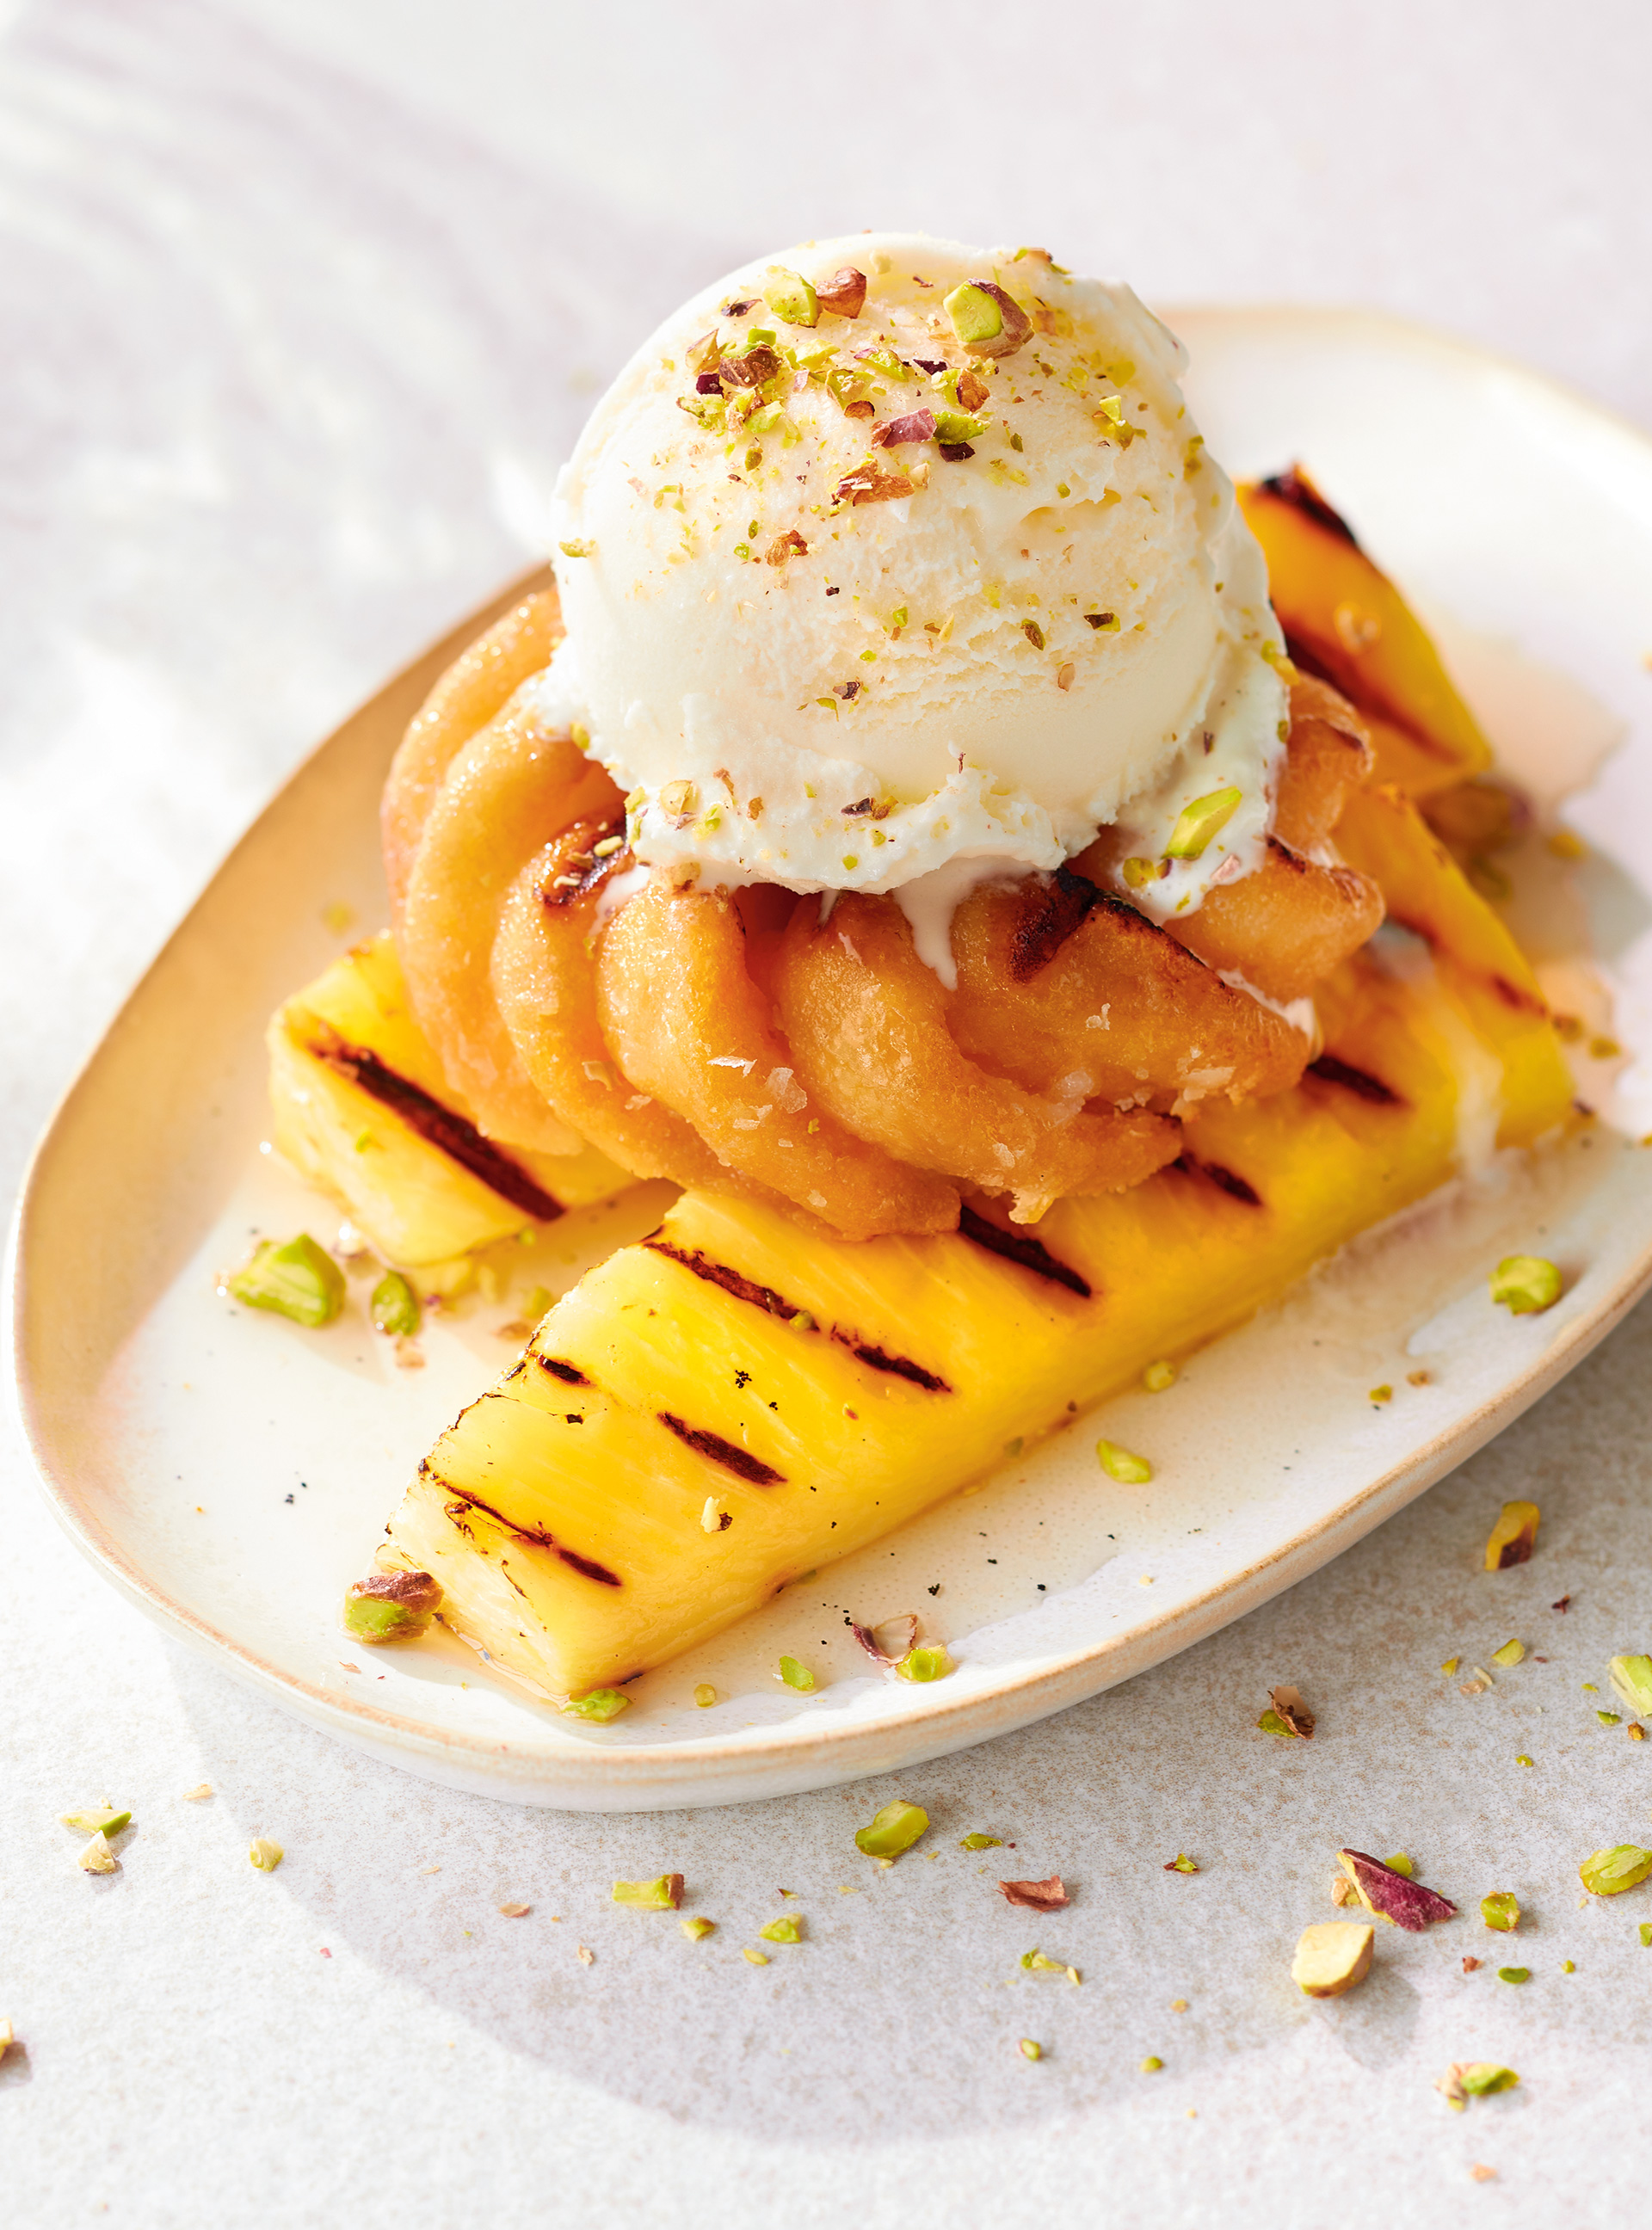 Grilled Pineapple and Doughnuts with Spiced Rum Syrup